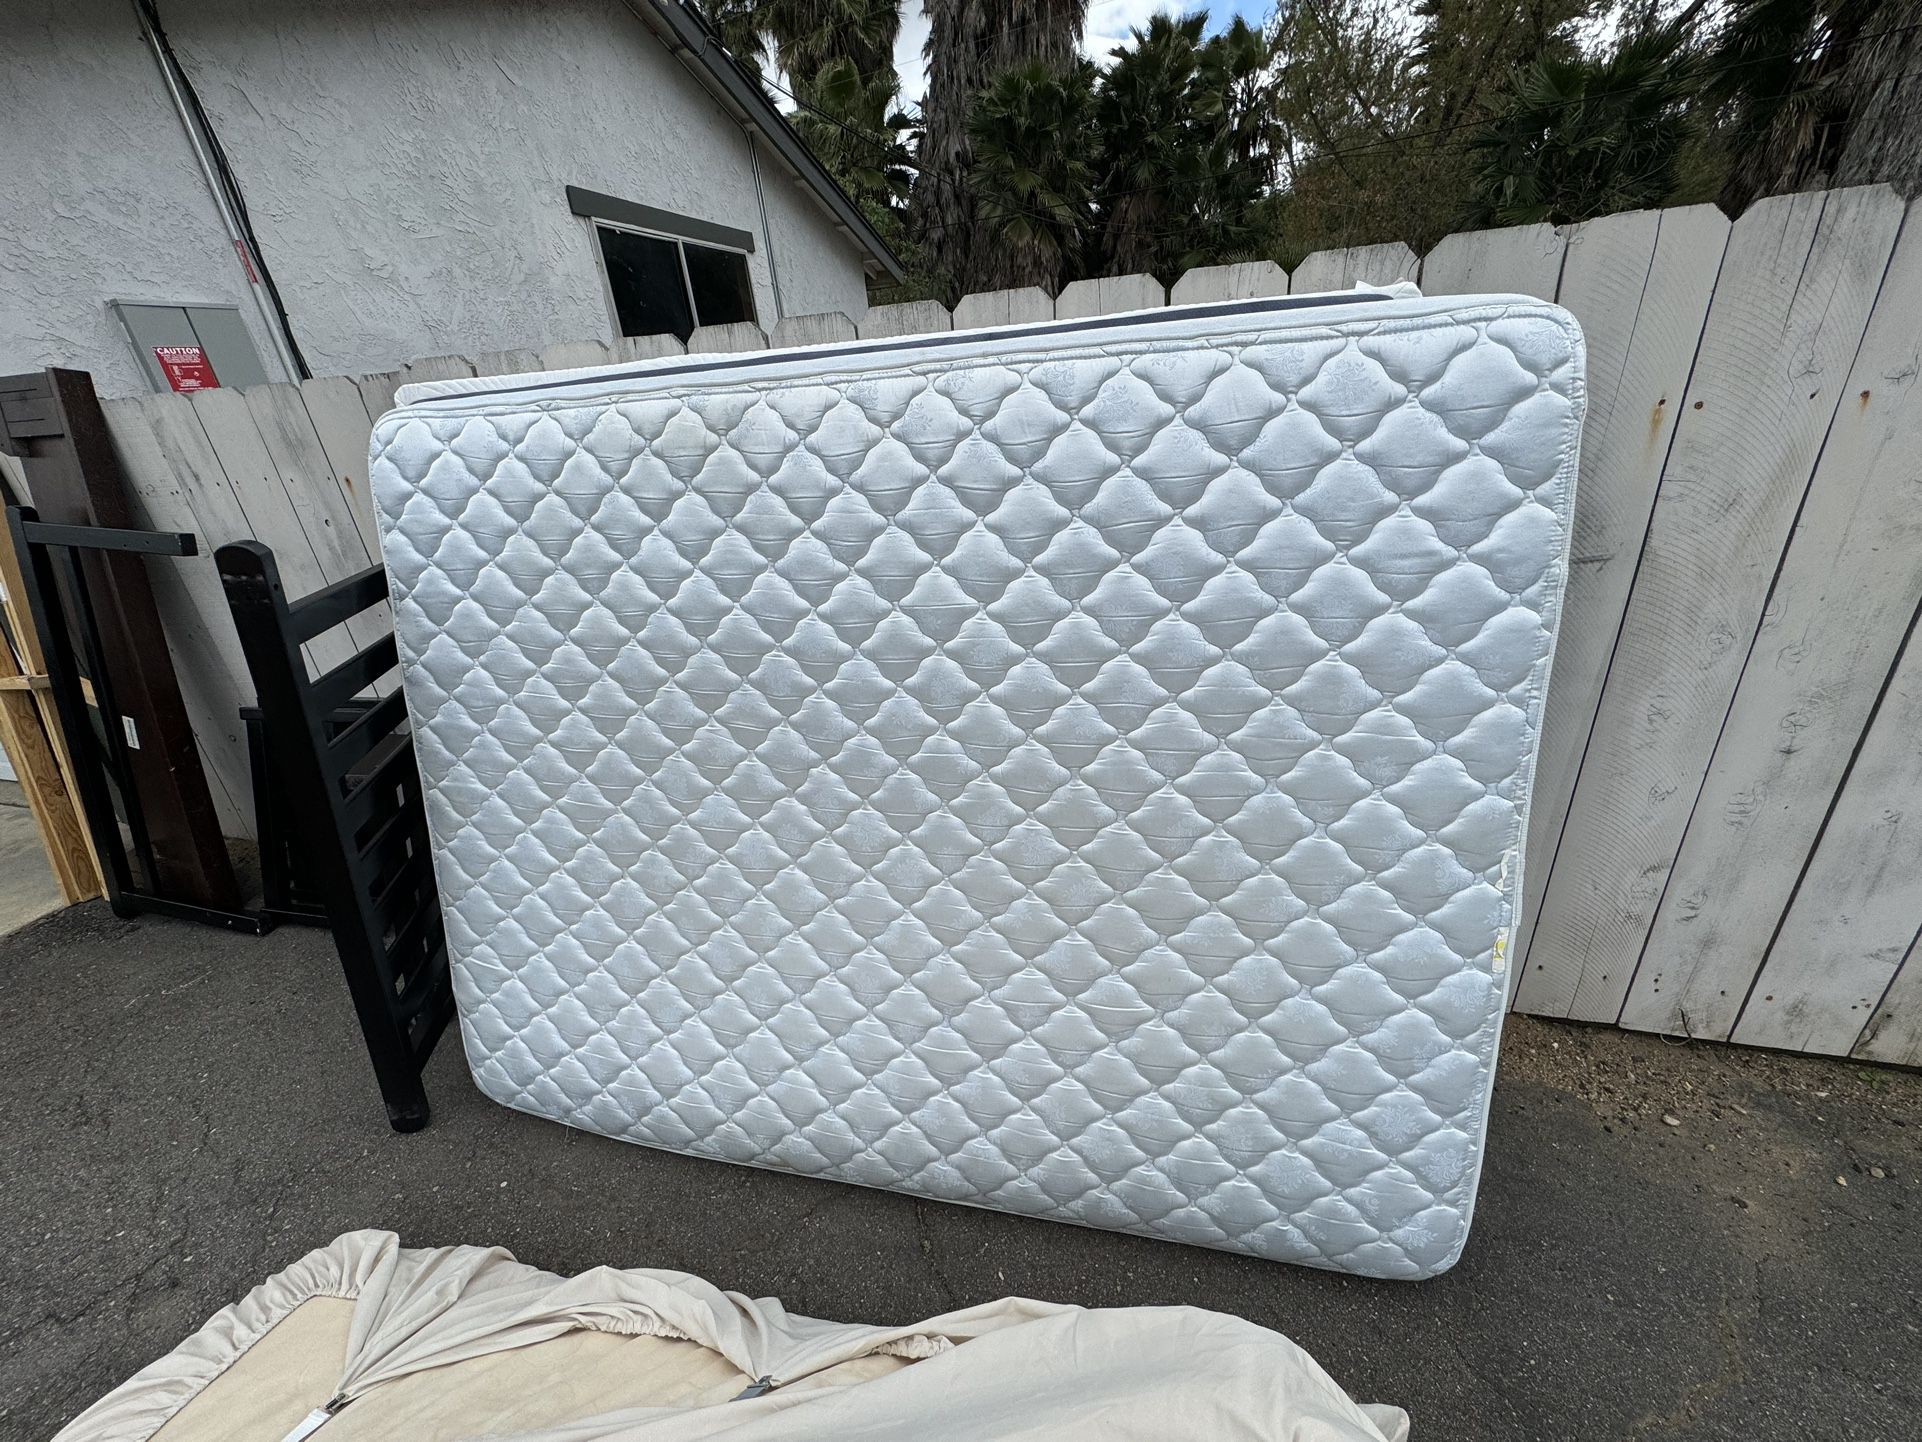 FREE - Queen Mattress And Box Spring - Poway